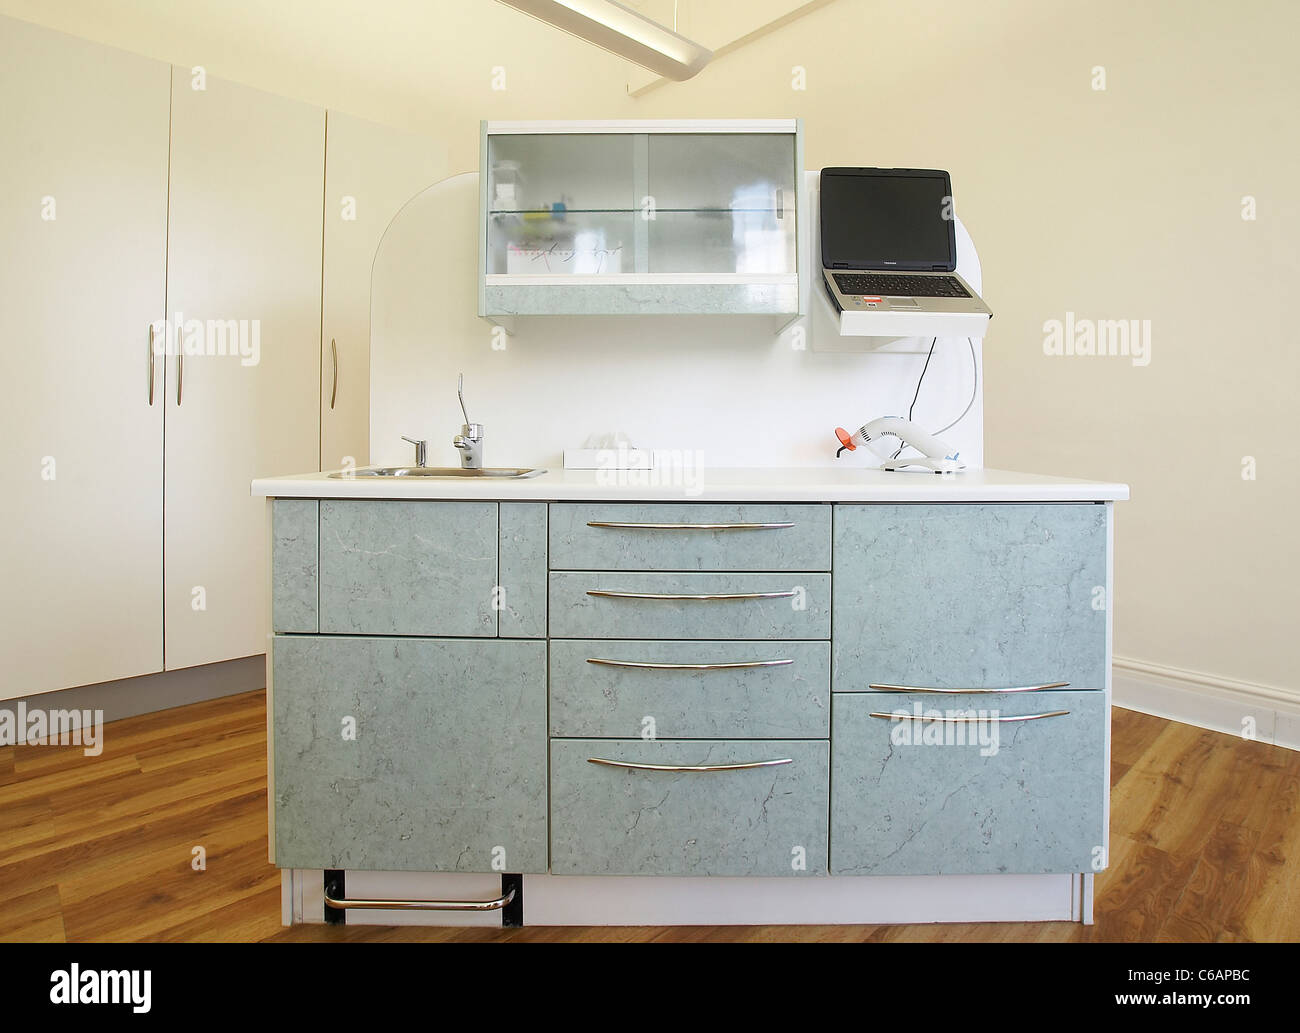 Storage Cabinets In A Dentistry Office Stock Photo 38345760 Alamy